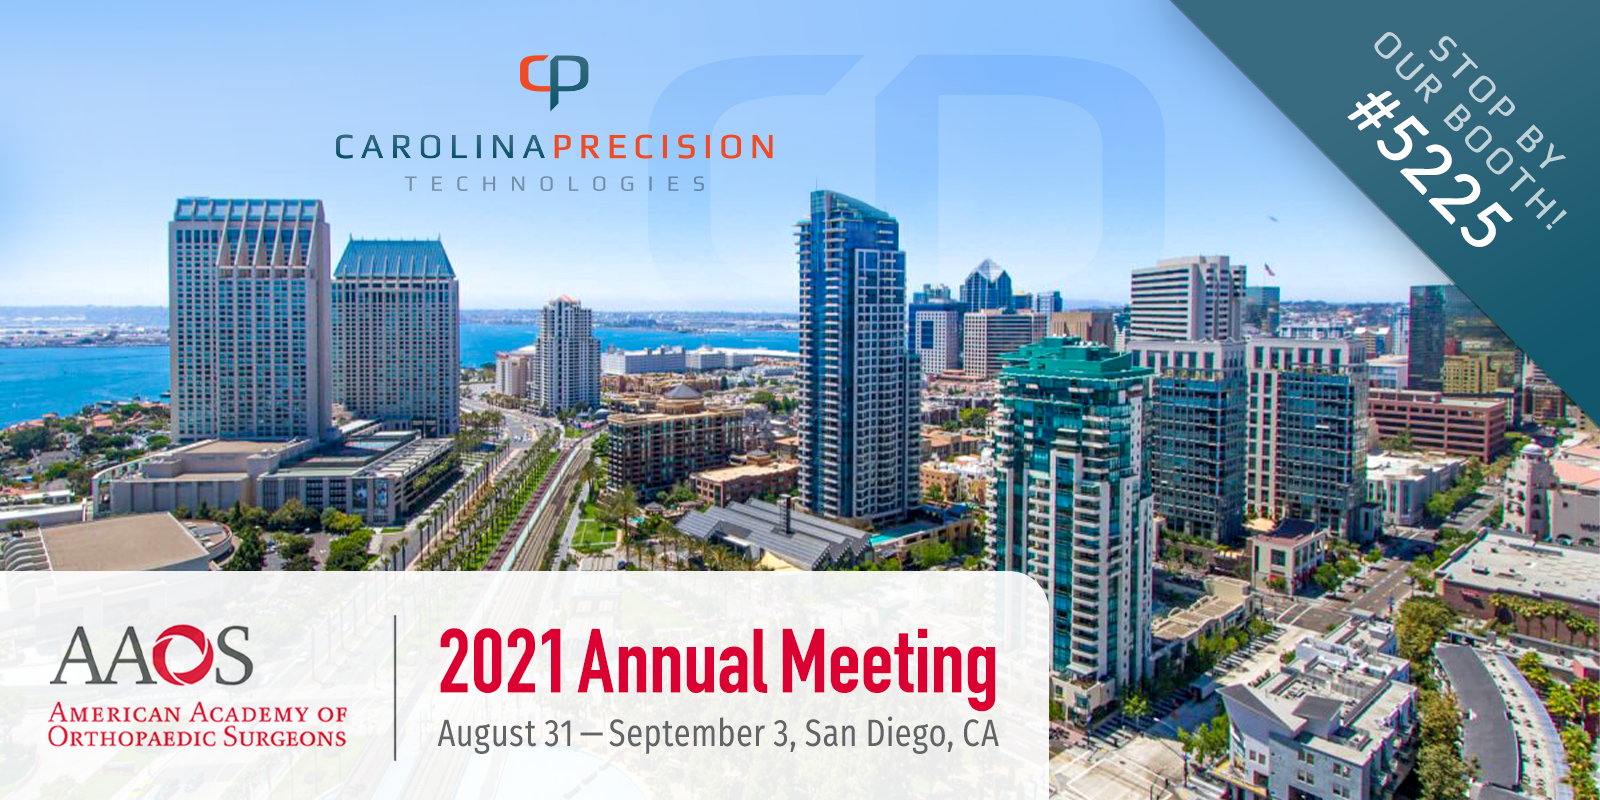 CPT Exhibiting at the AAOS 2021 Annual Meeting Carolina Precision